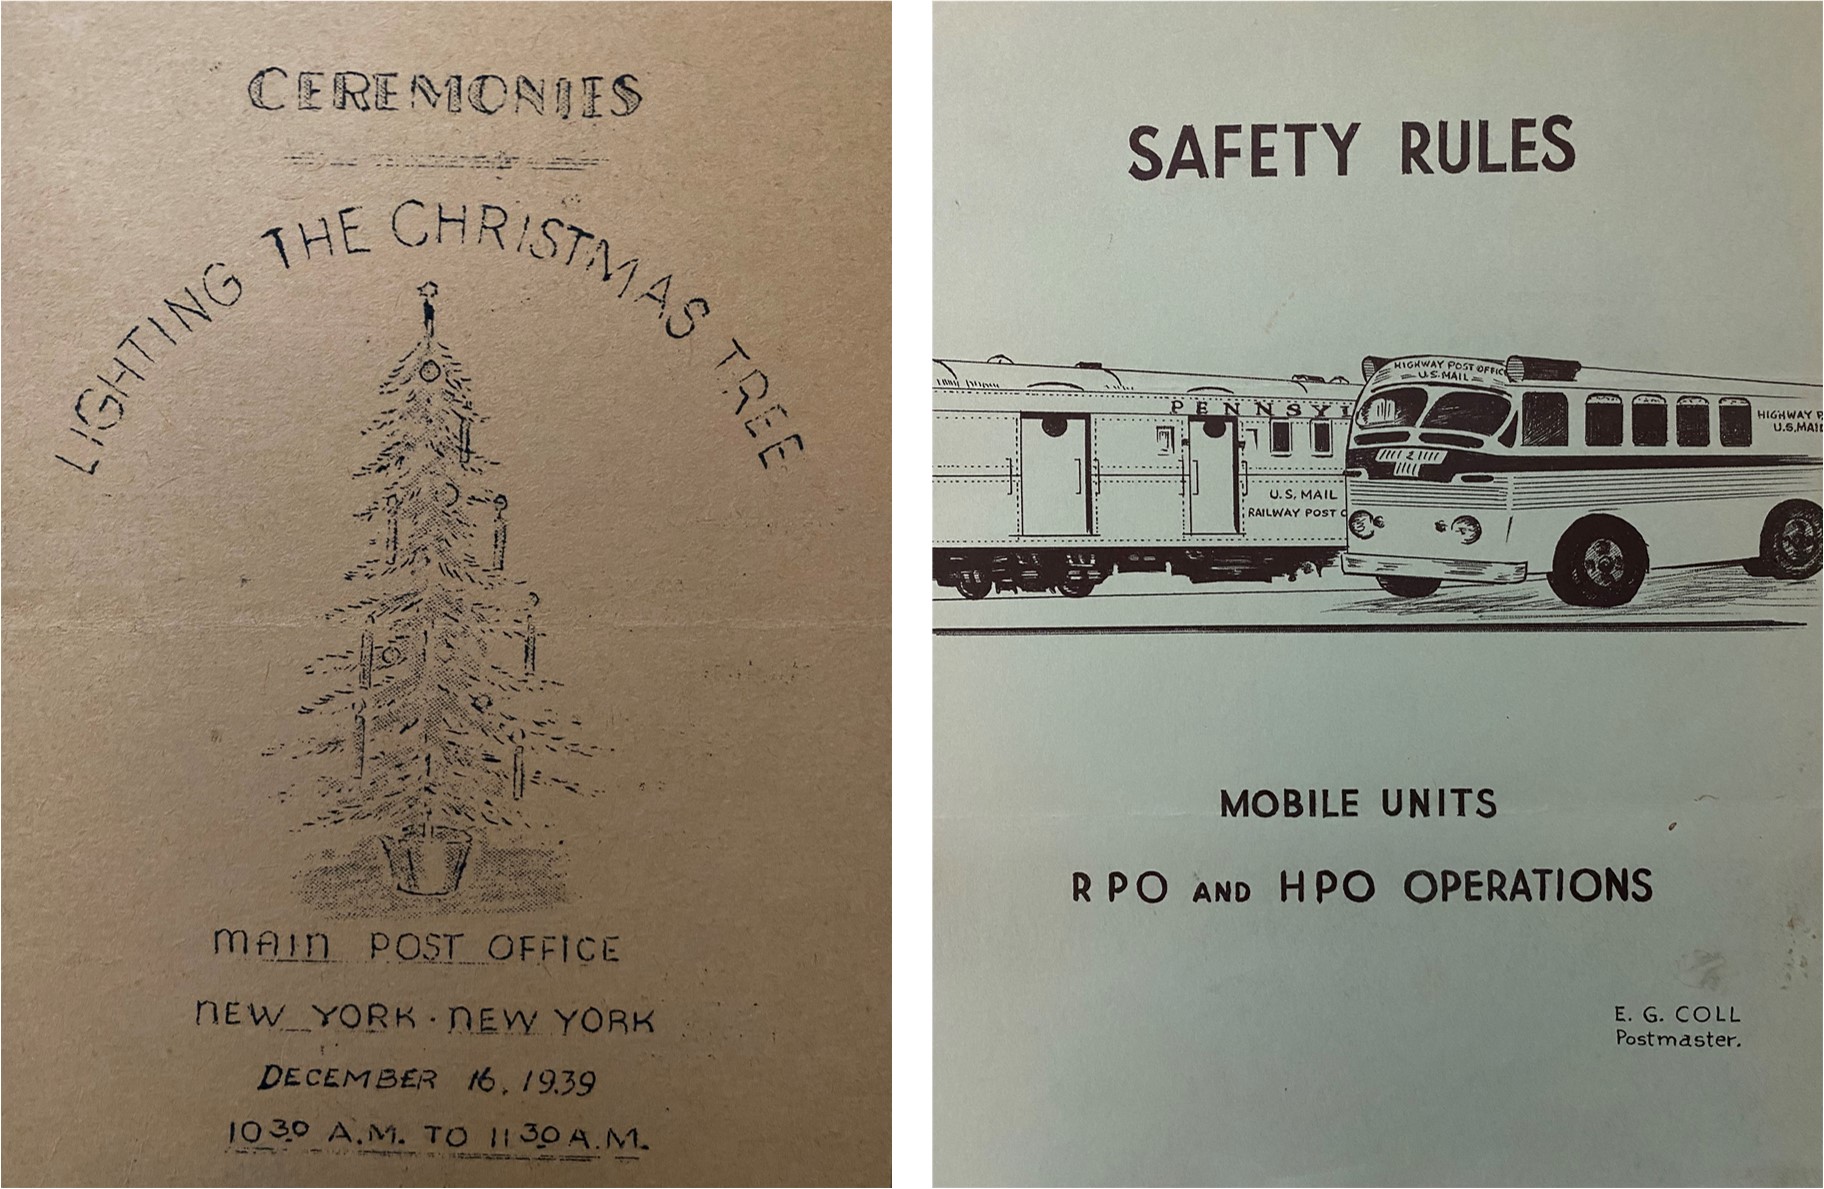 Left: brown paper pamphlet advertising Christmas tree lighting ceremony and drawing of Christmas tree printed in black ink Right: Off white with blue tint paper pamphlet with “Safety Rules” and drawings of a bus and train printed in black ink